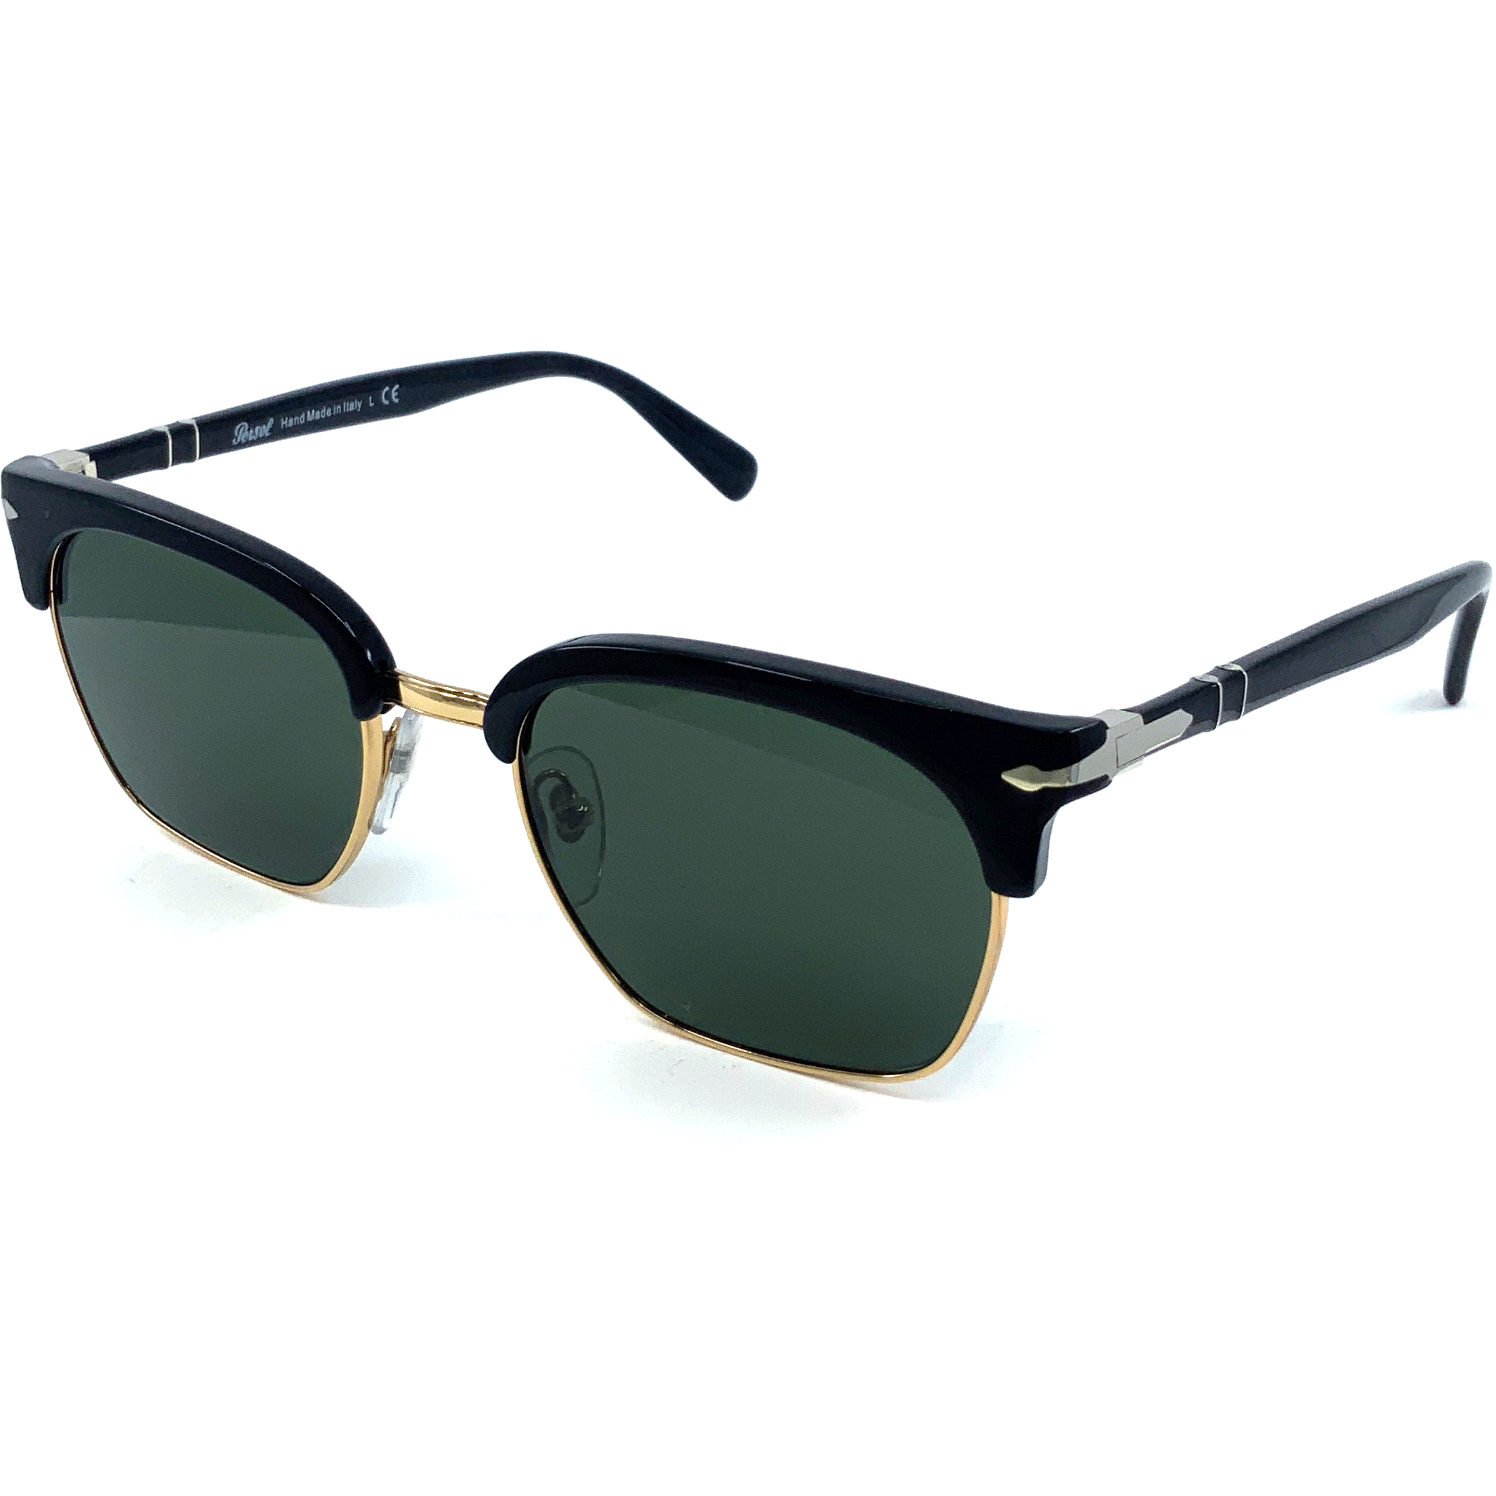 Persol / ペルソール サングラス | camillevieraservices.com